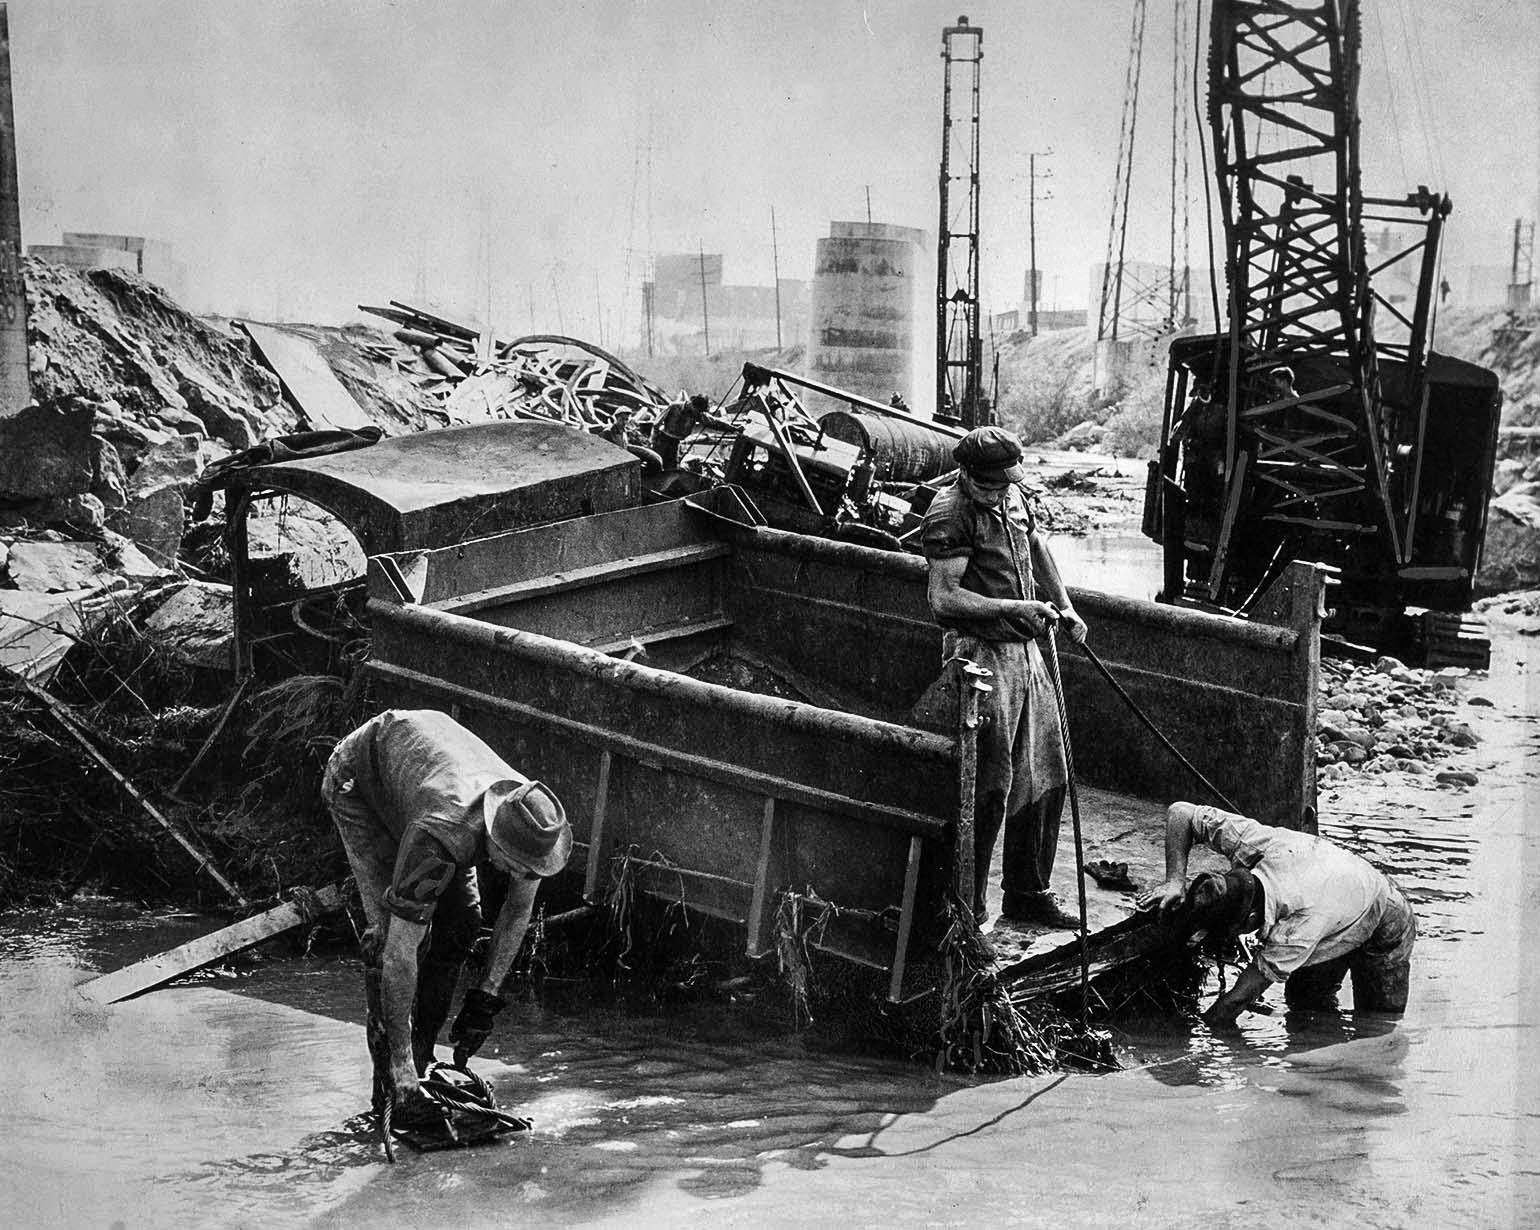 A salvage crew trys to dig out a gravel truck damaged by flooding along the Los Angeles River. The truck was at a construction project to build a railroad crossing for Union Pacific across the river, 1938